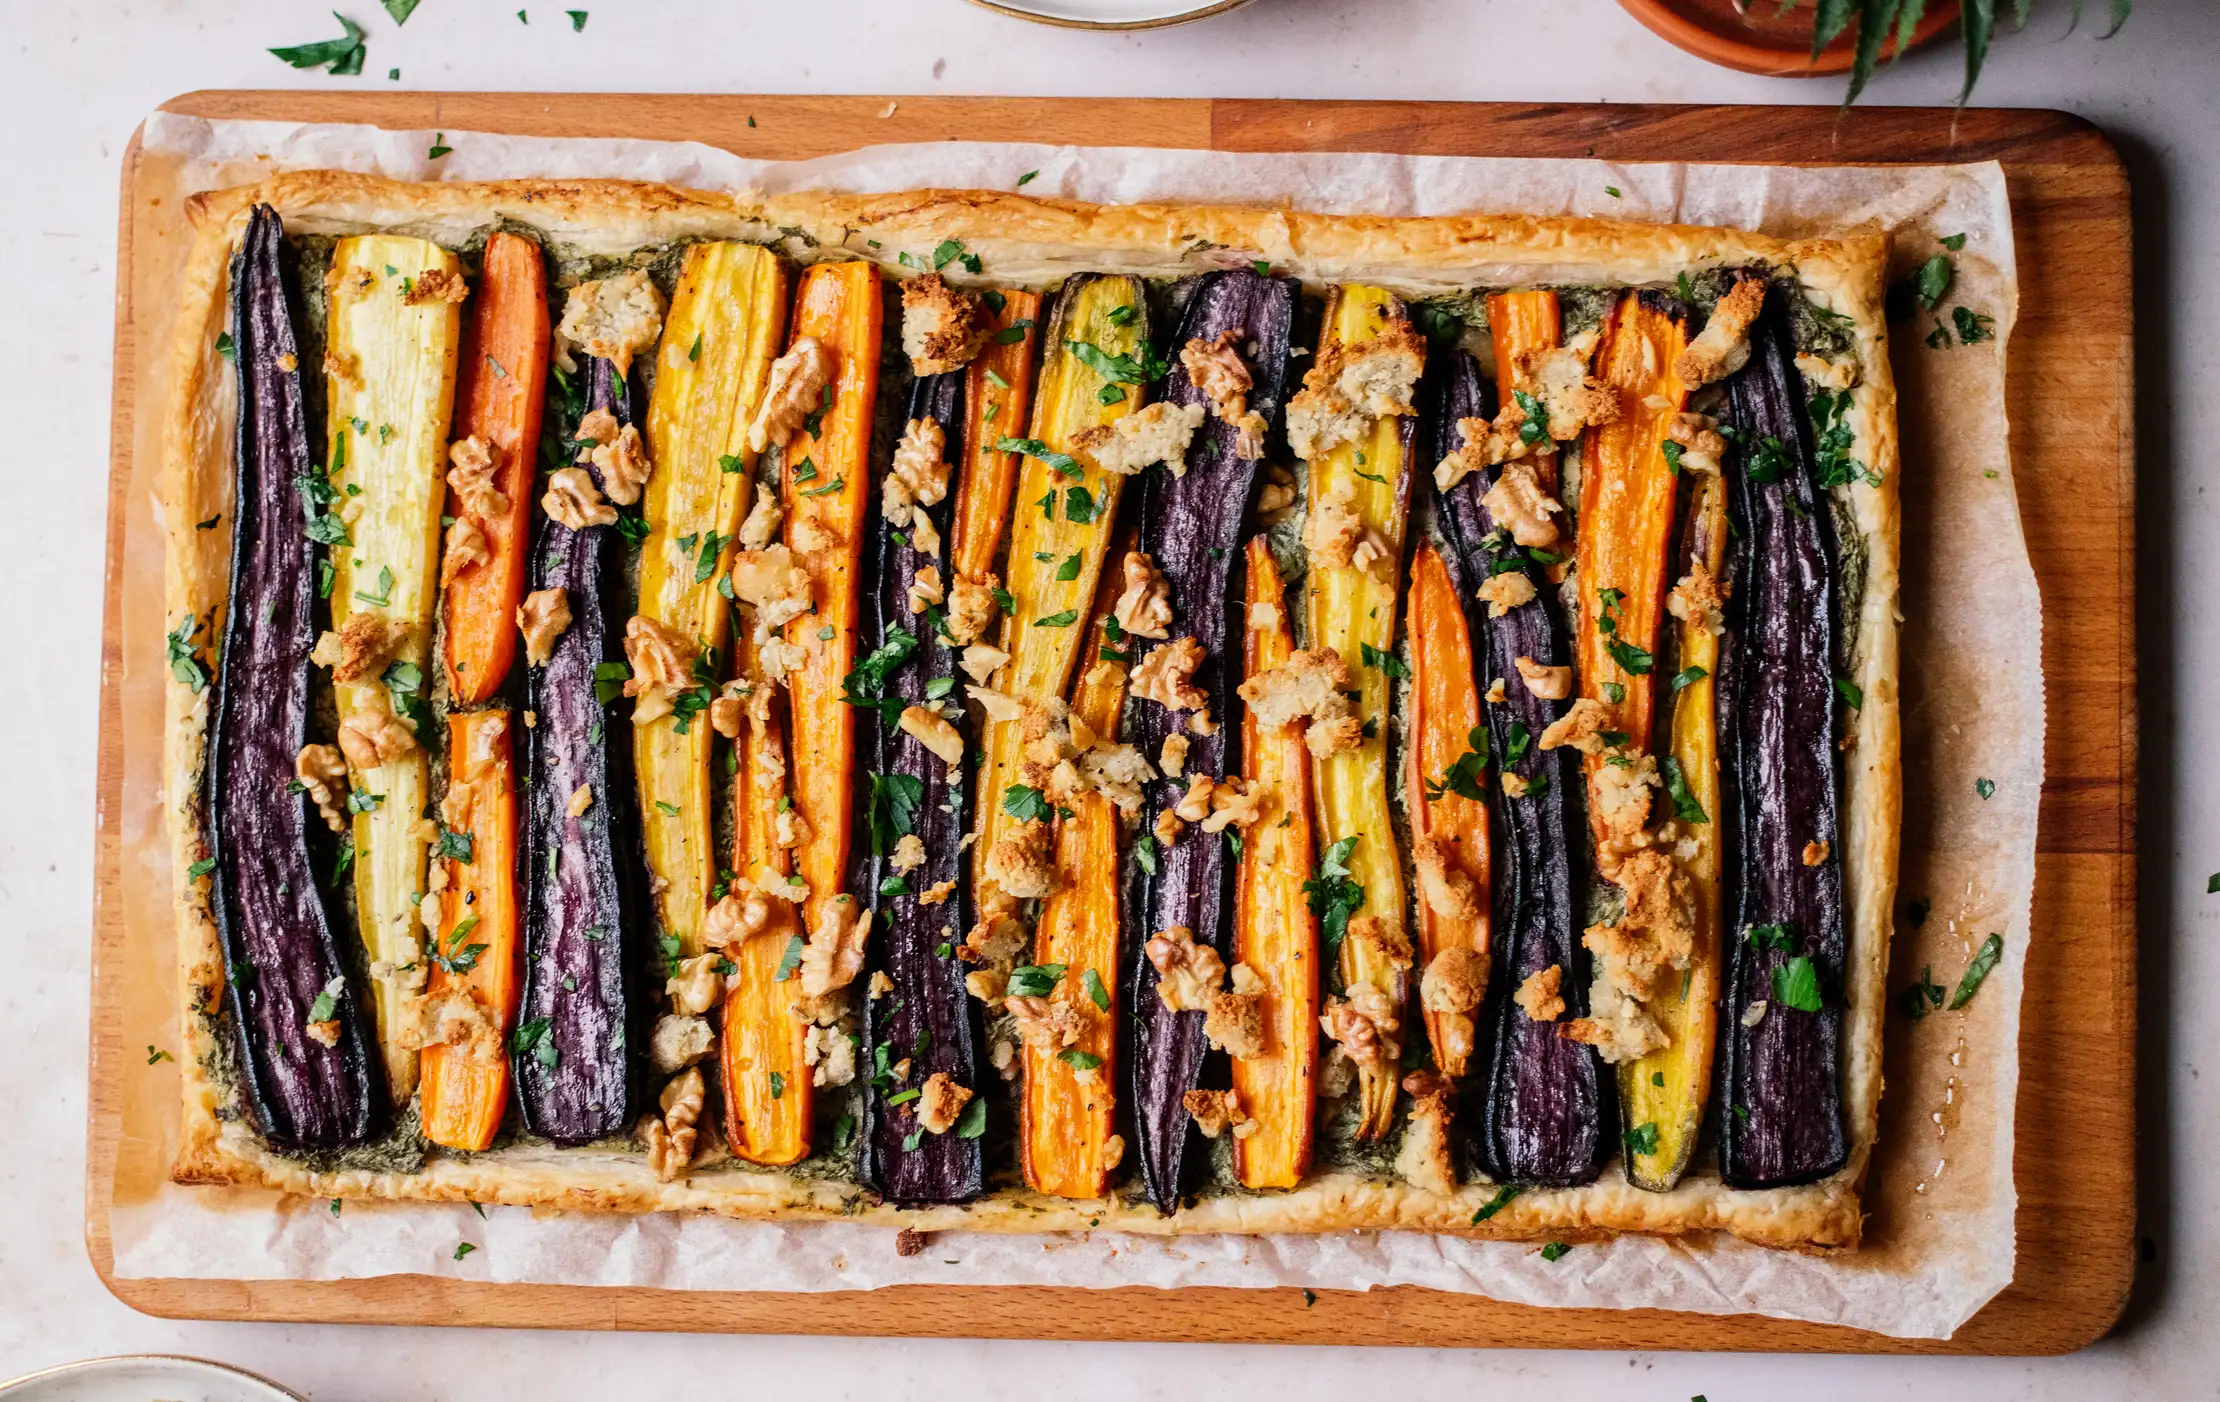 Carrot tart with puff pastry